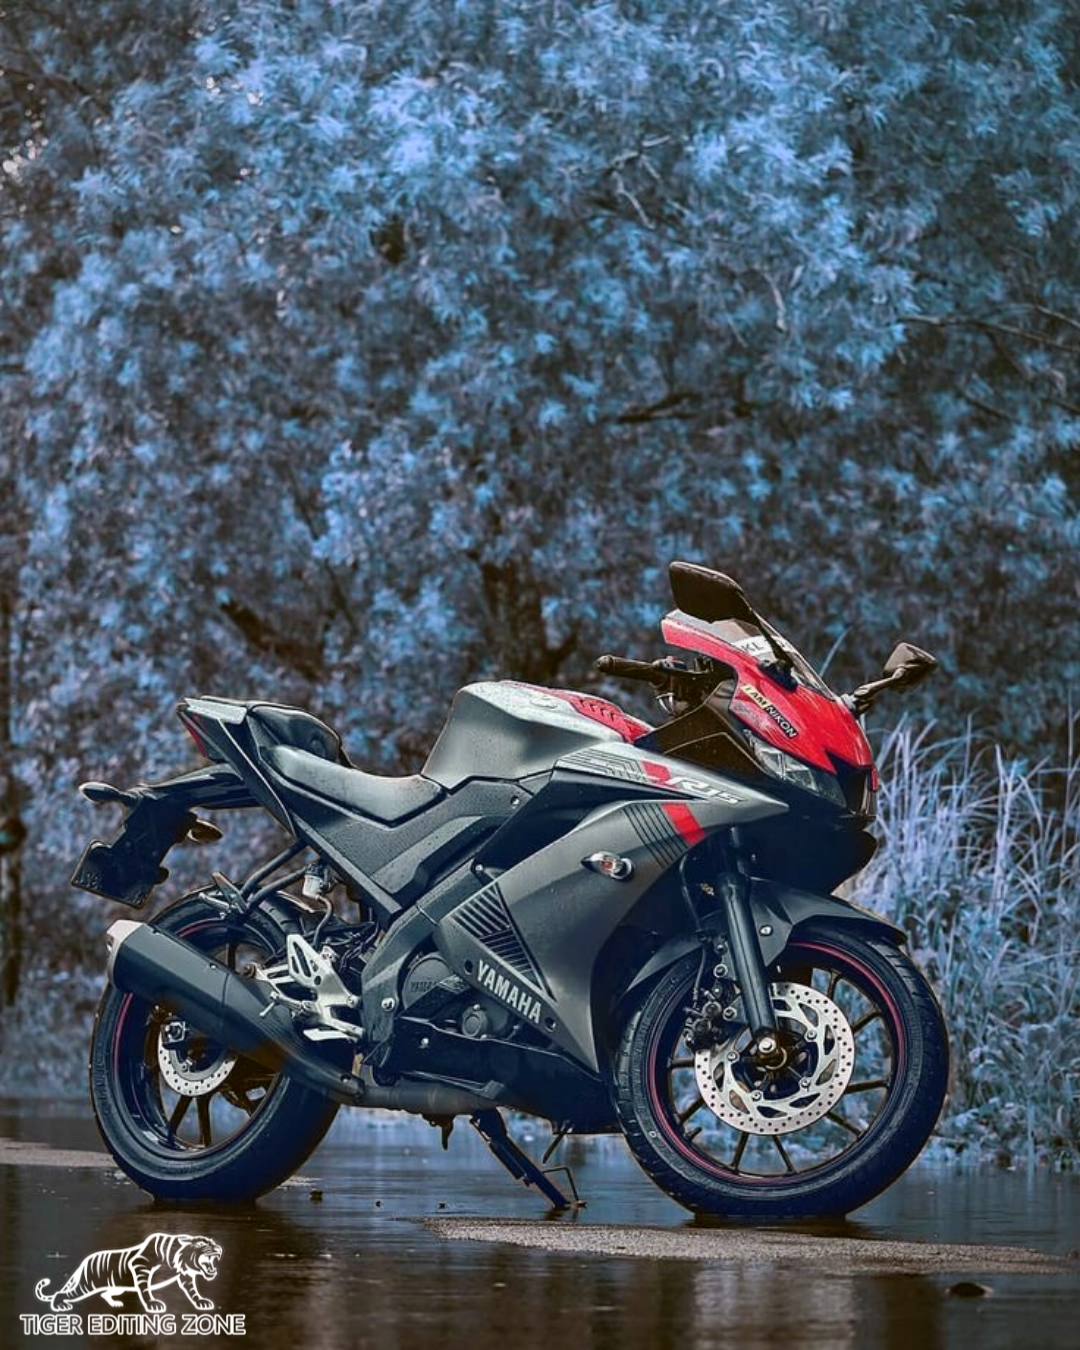 R15 Bike Editing Background Images Hd | R15 Bike Background For Editing